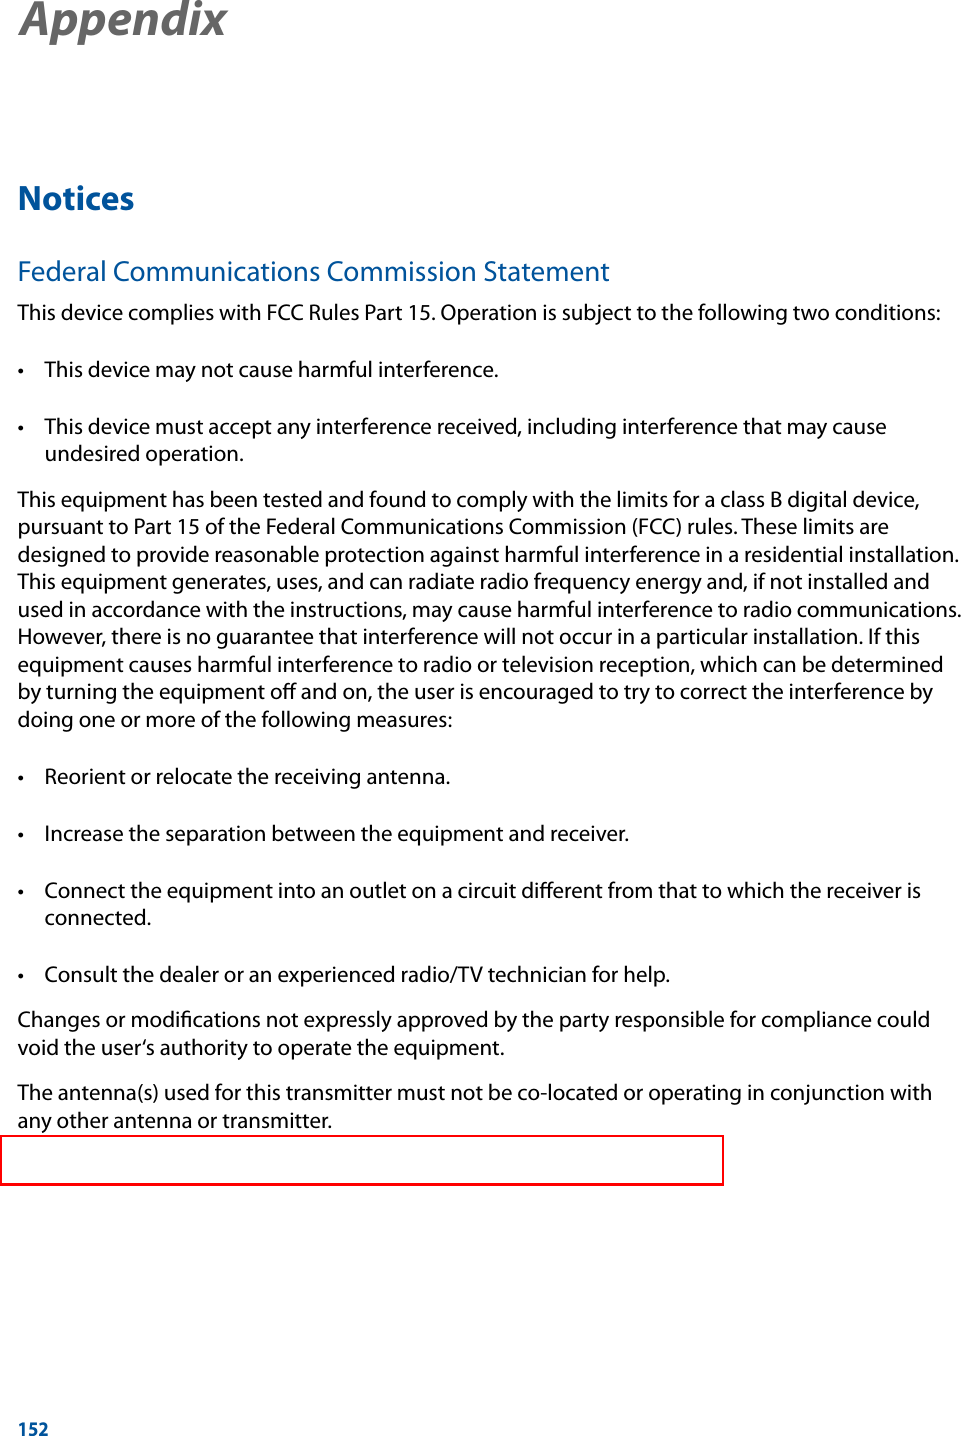 152NoticesFederal Communications Commission StatementThis device complies with FCC Rules Part 15. Operation is subject to the following two conditions:• Thisdevicemaynotcauseharmfulinterference.• Thisdevicemustacceptanyinterferencereceived,includinginterferencethatmaycauseundesired operation.This equipment has been tested and found to comply with the limits for a class B digital device, pursuant to Part 15 of the Federal Communications Commission (FCC) rules. These limits are designed to provide reasonable protection against harmful interference in a residential installation. This equipment generates, uses, and can radiate radio frequency energy and, if not installed and used in accordance with the instructions, may cause harmful interference to radio communications. However, there is no guarantee that interference will not occur in a particular installation. If this equipment causes harmful interference to radio or television reception, which can be determined by turning the equipment oﬀ and on, the user is encouraged to try to correct the interference by doing one or more of the following measures:• Reorientorrelocatethereceivingantenna.• Increasetheseparationbetweentheequipmentandreceiver.• Connecttheequipmentintoanoutletonacircuitdierentfromthattowhichthereceiverisconnected.• Consultthedealeroranexperiencedradio/TVtechnicianforhelp.Changes or modiﬁcations not expressly approved by the party responsible for compliance could void the user‘s authority to operate the equipment.The antenna(s) used for this transmitter must not be co-located or operating in conjunction with any other antenna or transmitter.AppendixAppendix 